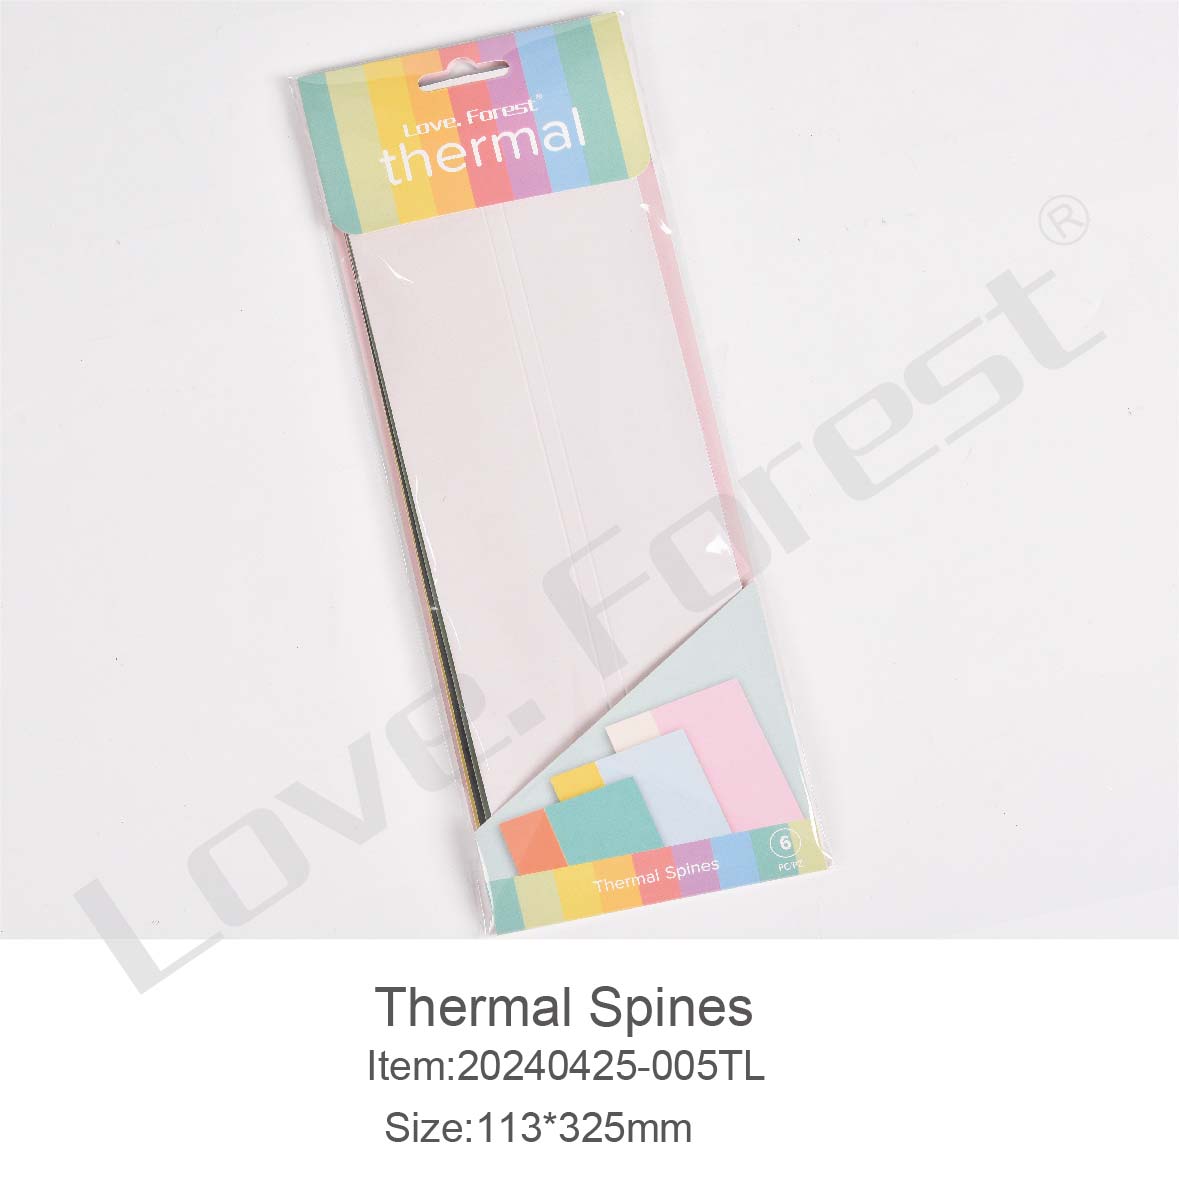 Thermal Spines